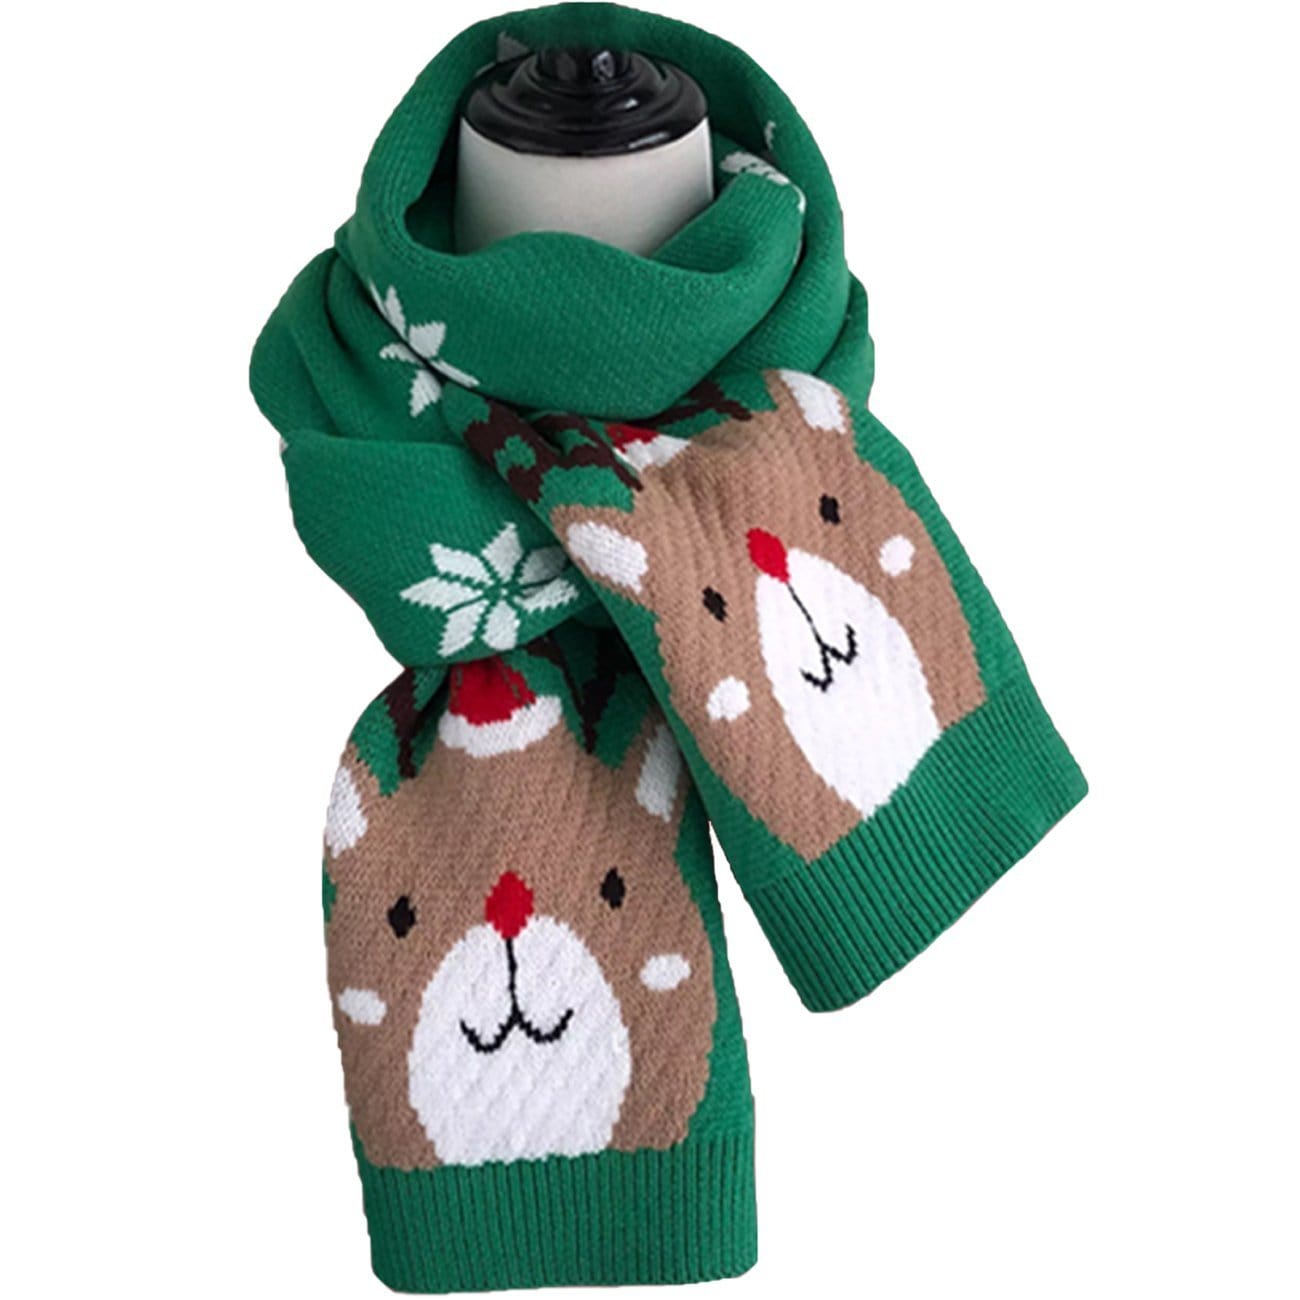 Fawn Snowflake Christmas Knit Scarf Streetwear Brand Techwear Combat Tactical YUGEN THEORY